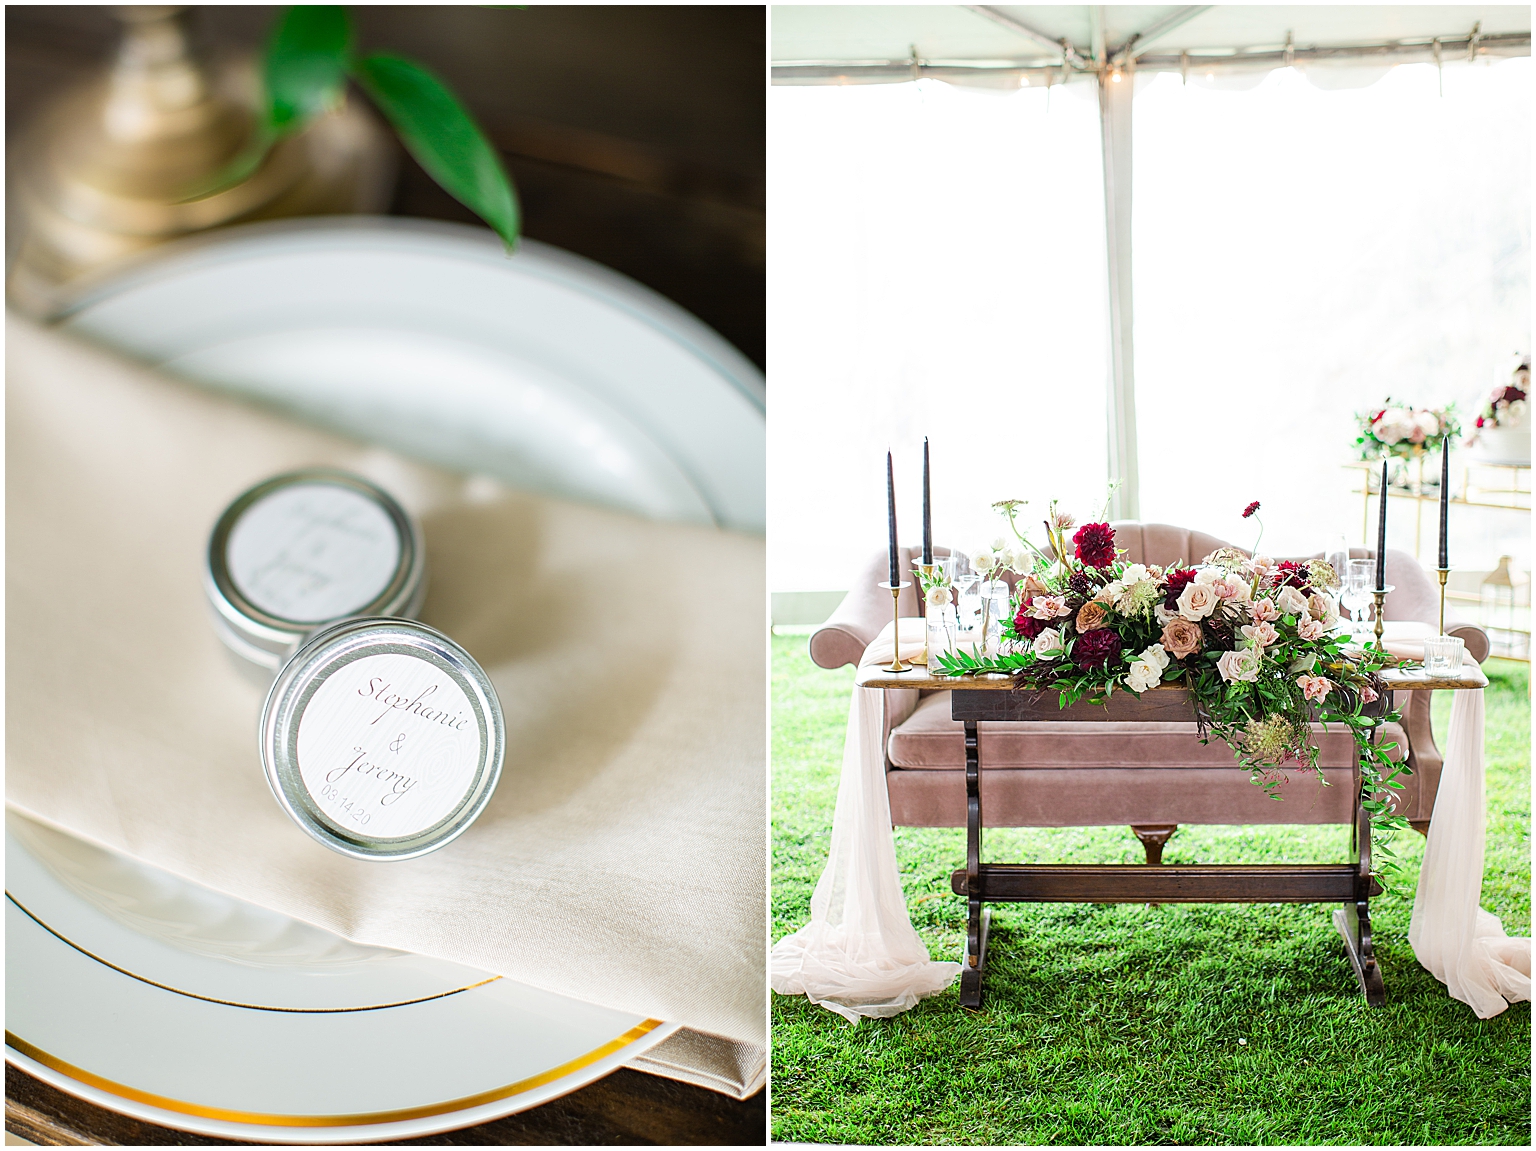 Personalized Candle Wedding Favors and the romantically draped bride and groom's table